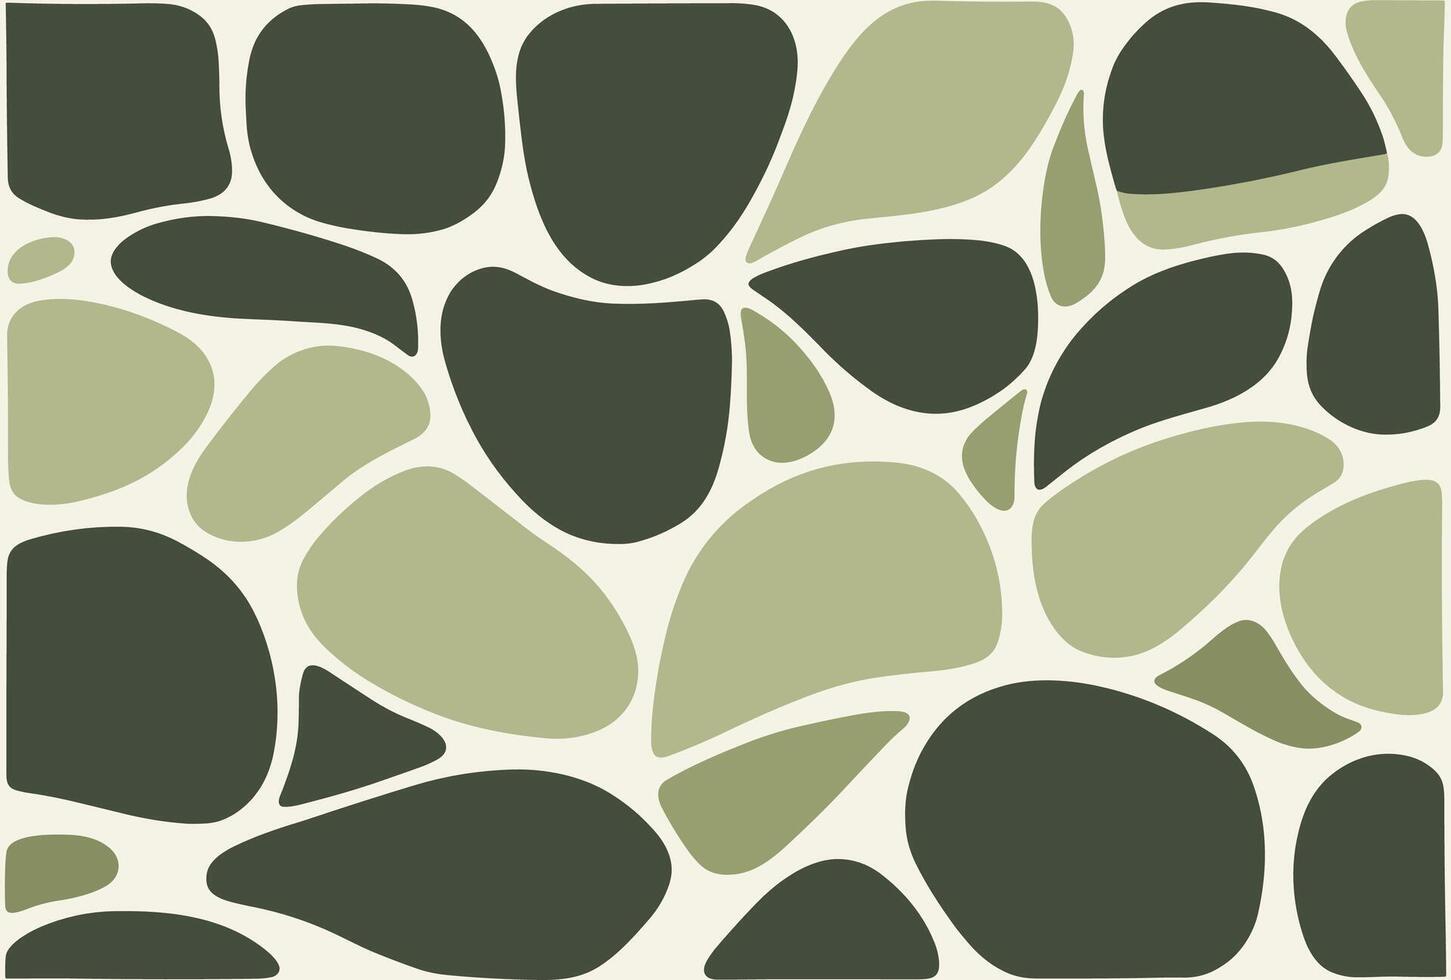 Gray and White Print That Has Four Leaves, in the Style of Organic Biomorphic Forms, Organic Flowing Forms, Light Green and Beige, Fluid Figures, Playful Shapes vector